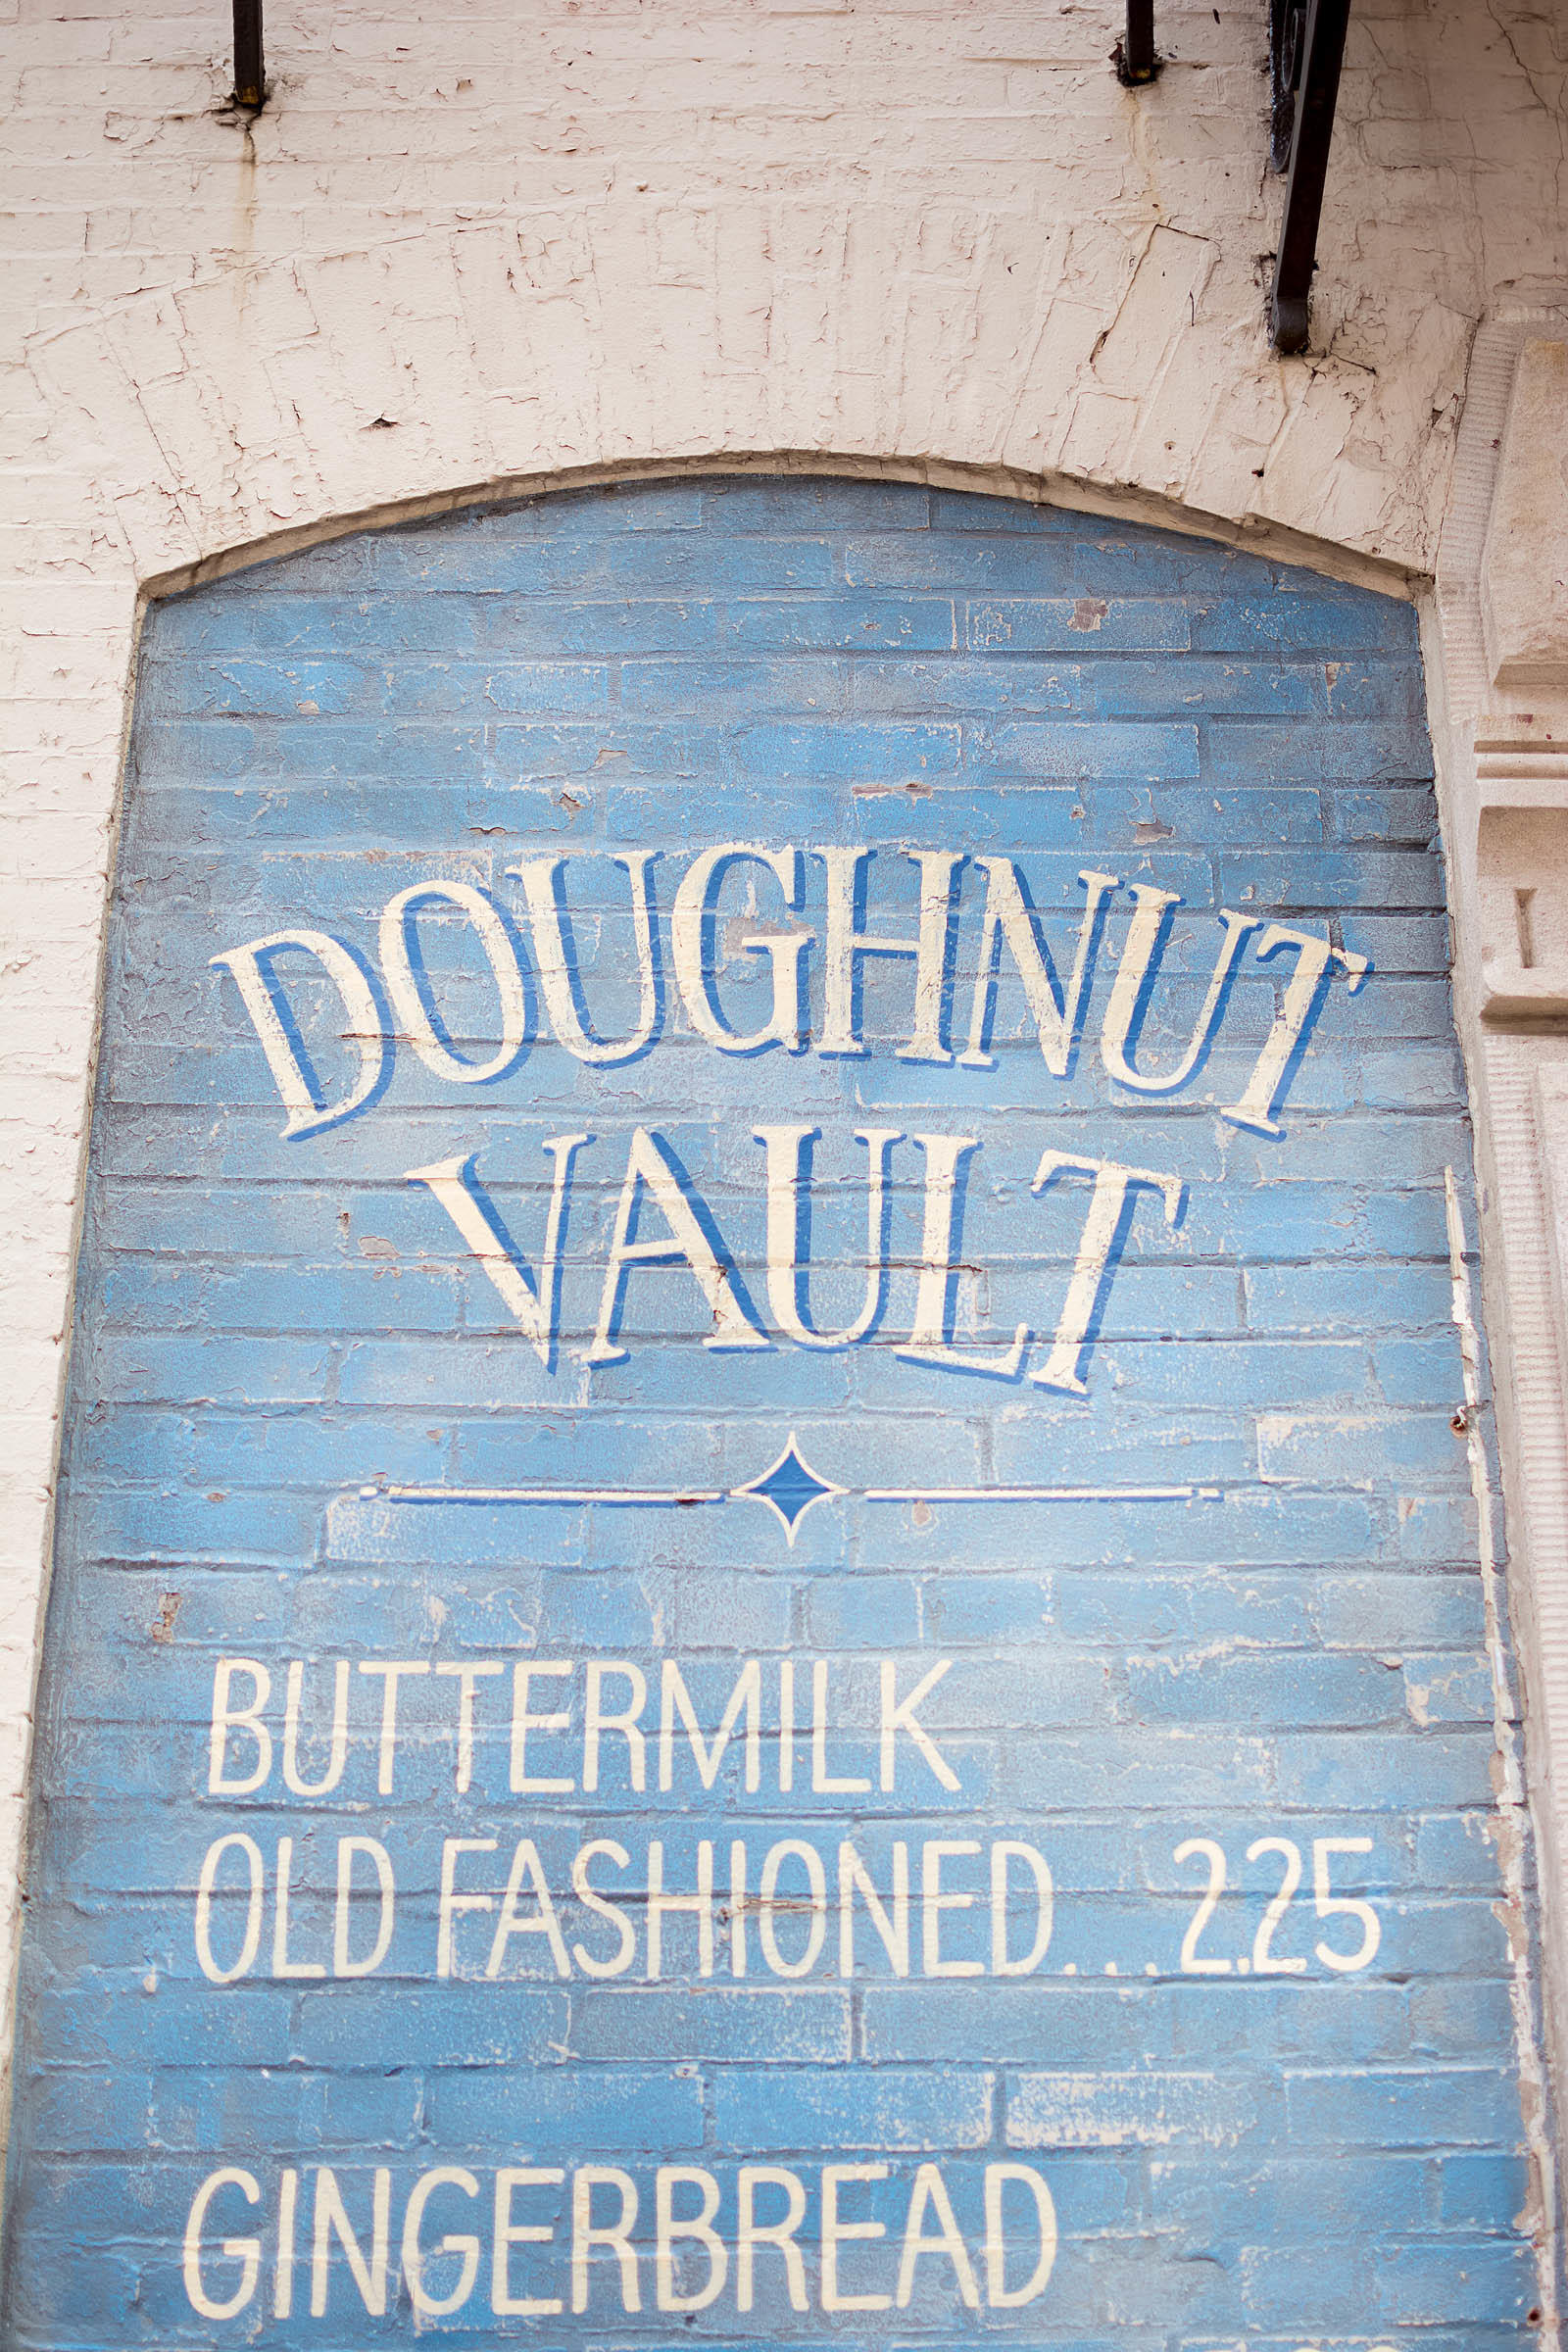 Doughnut Vault Chicago River North Old Fashioned